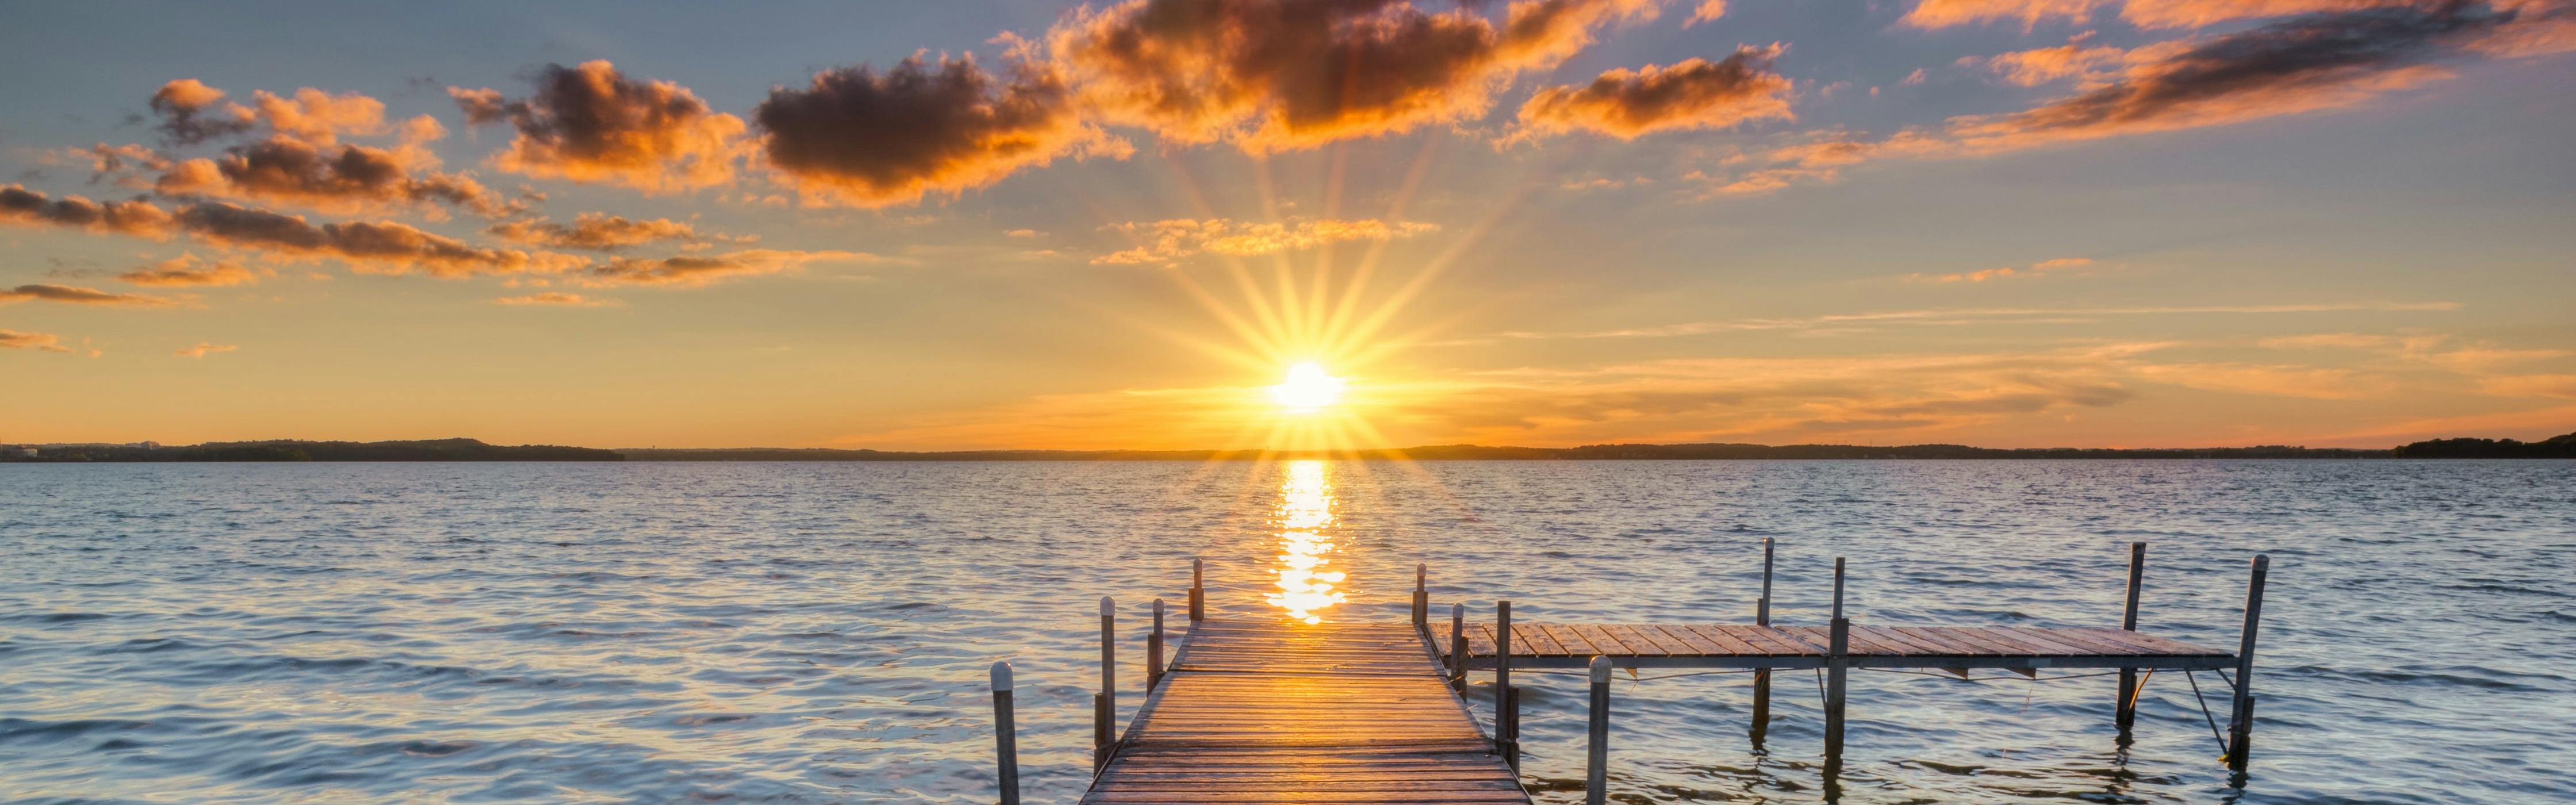 A dock takes an L-turn to the right in front of the setting sun which is sending orange right out in rays.